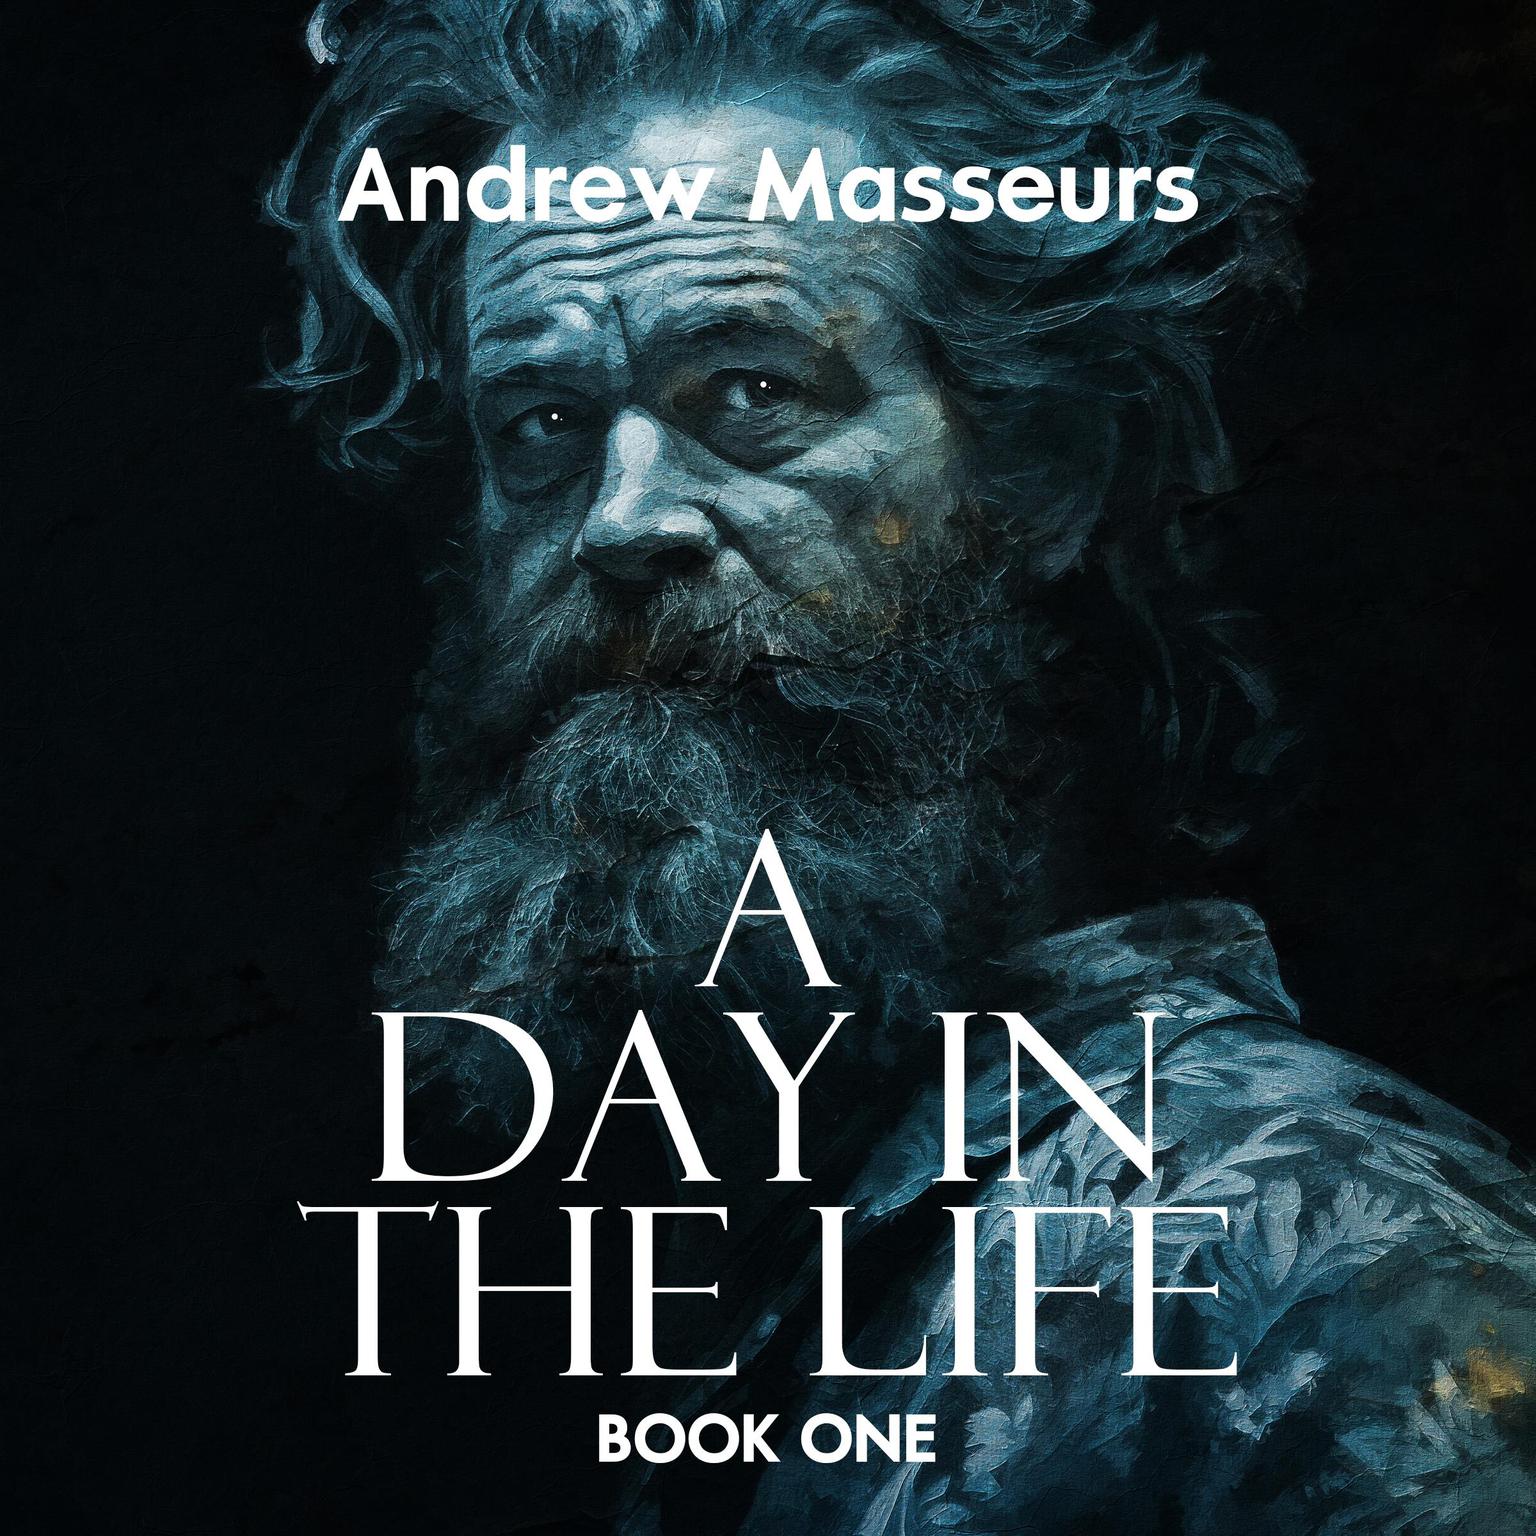 A Day in the life (Novella): A Day in the Life Series, Book One Audiobook, by Andrew Masseurs